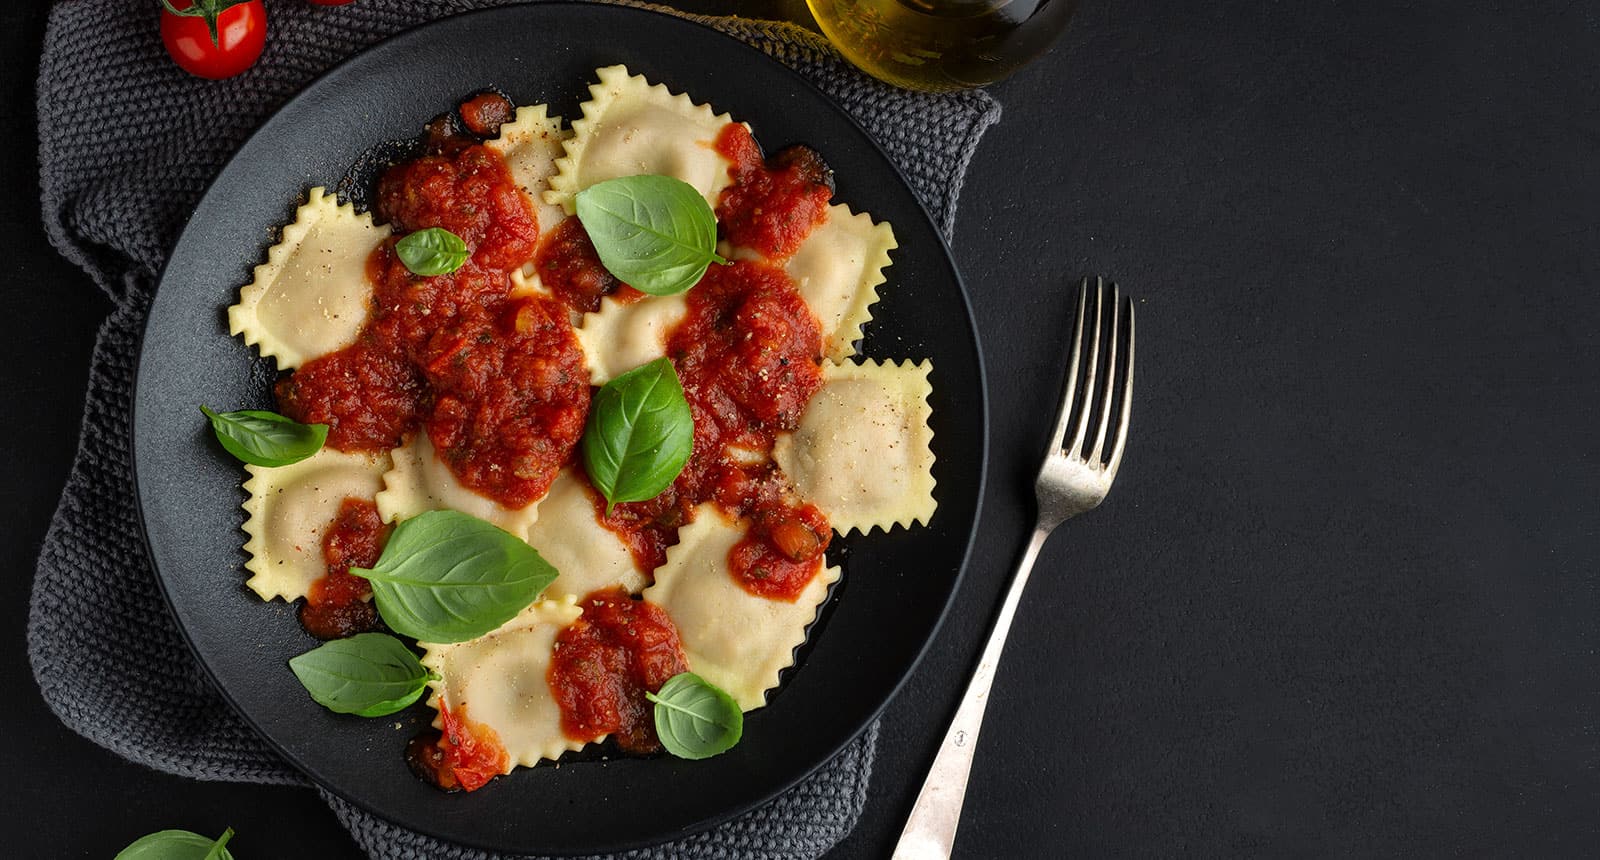 What To Serve With Ravioli: 13 Best Side Dishes In 2022 (+ Caesar Salad)